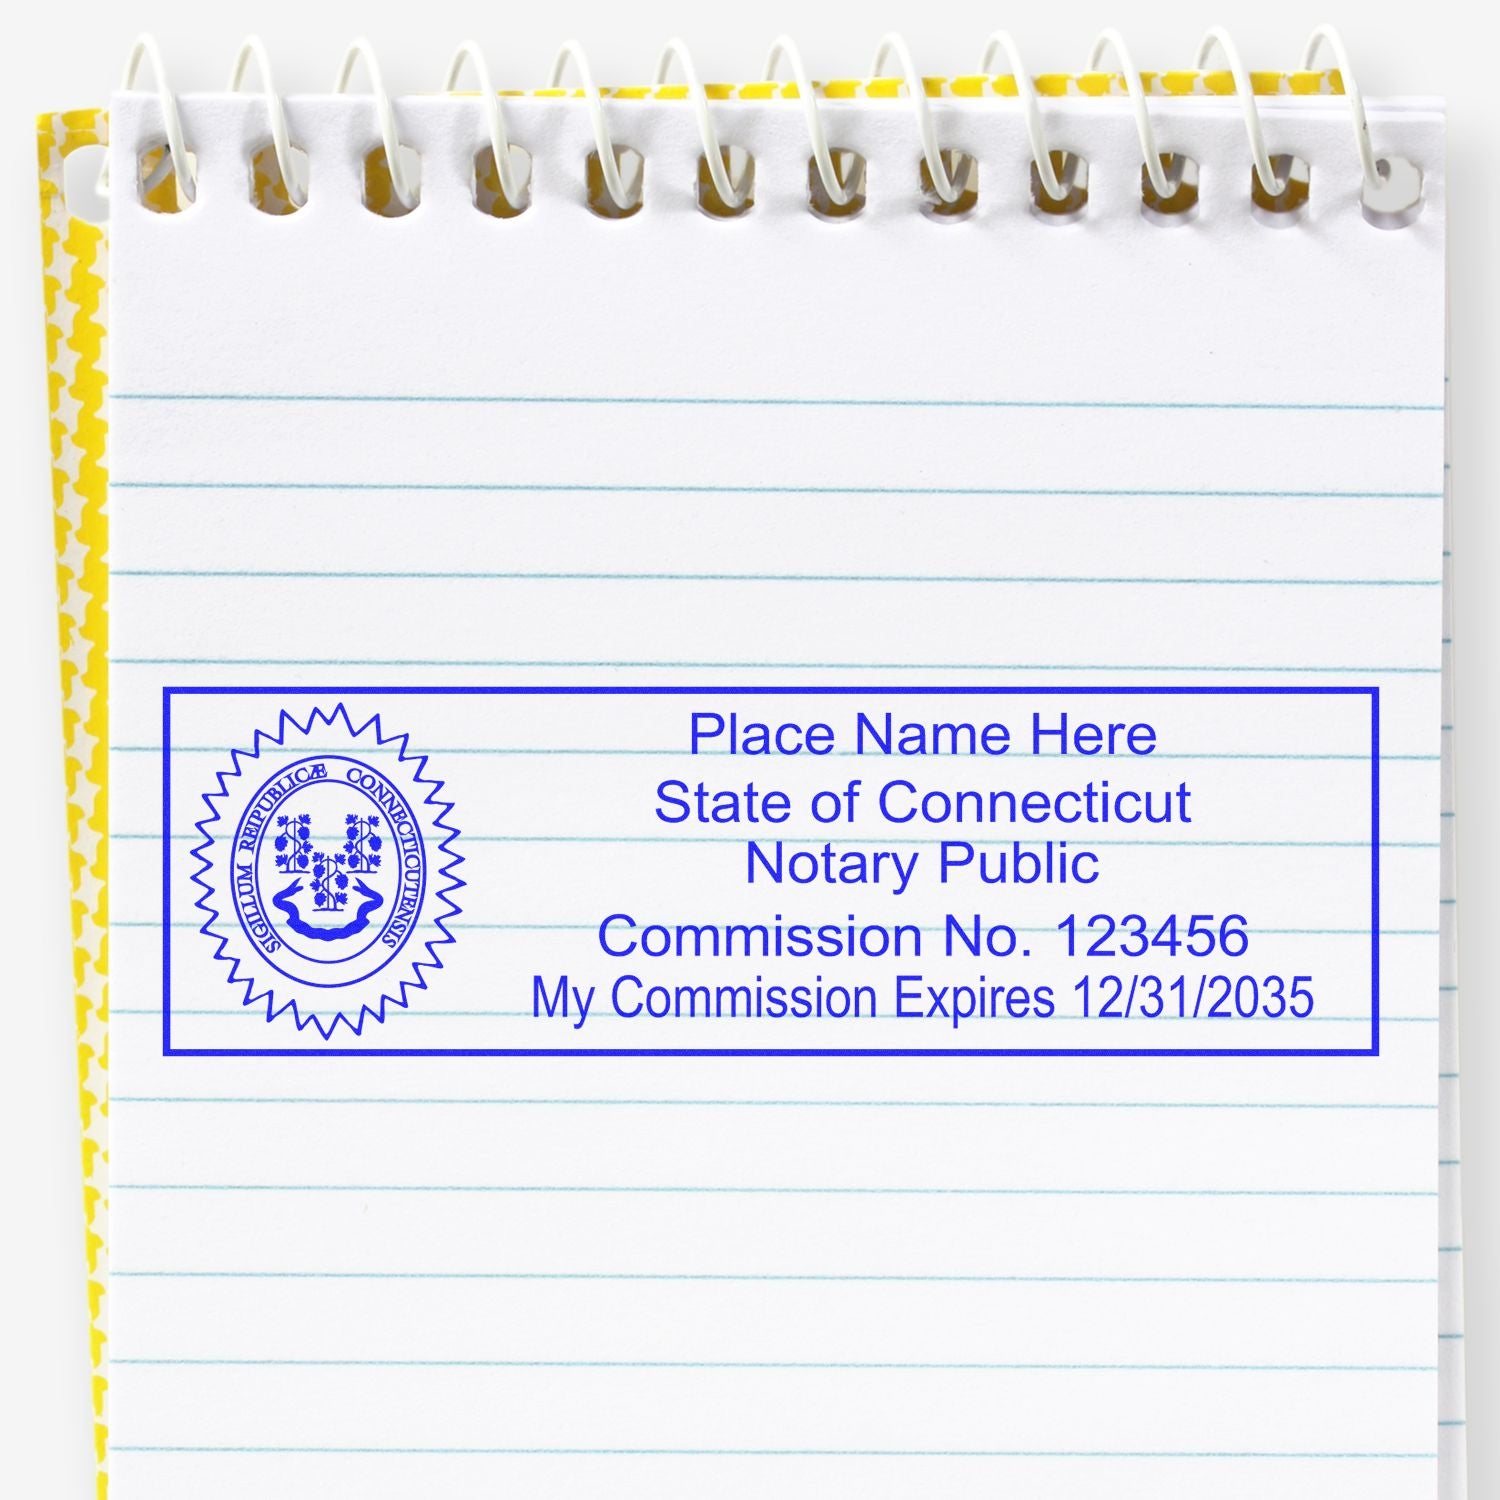 Slim Pre-Inked State Seal Notary Stamp for Connecticut in use photo showing a stamped imprint of the Slim Pre-Inked State Seal Notary Stamp for Connecticut